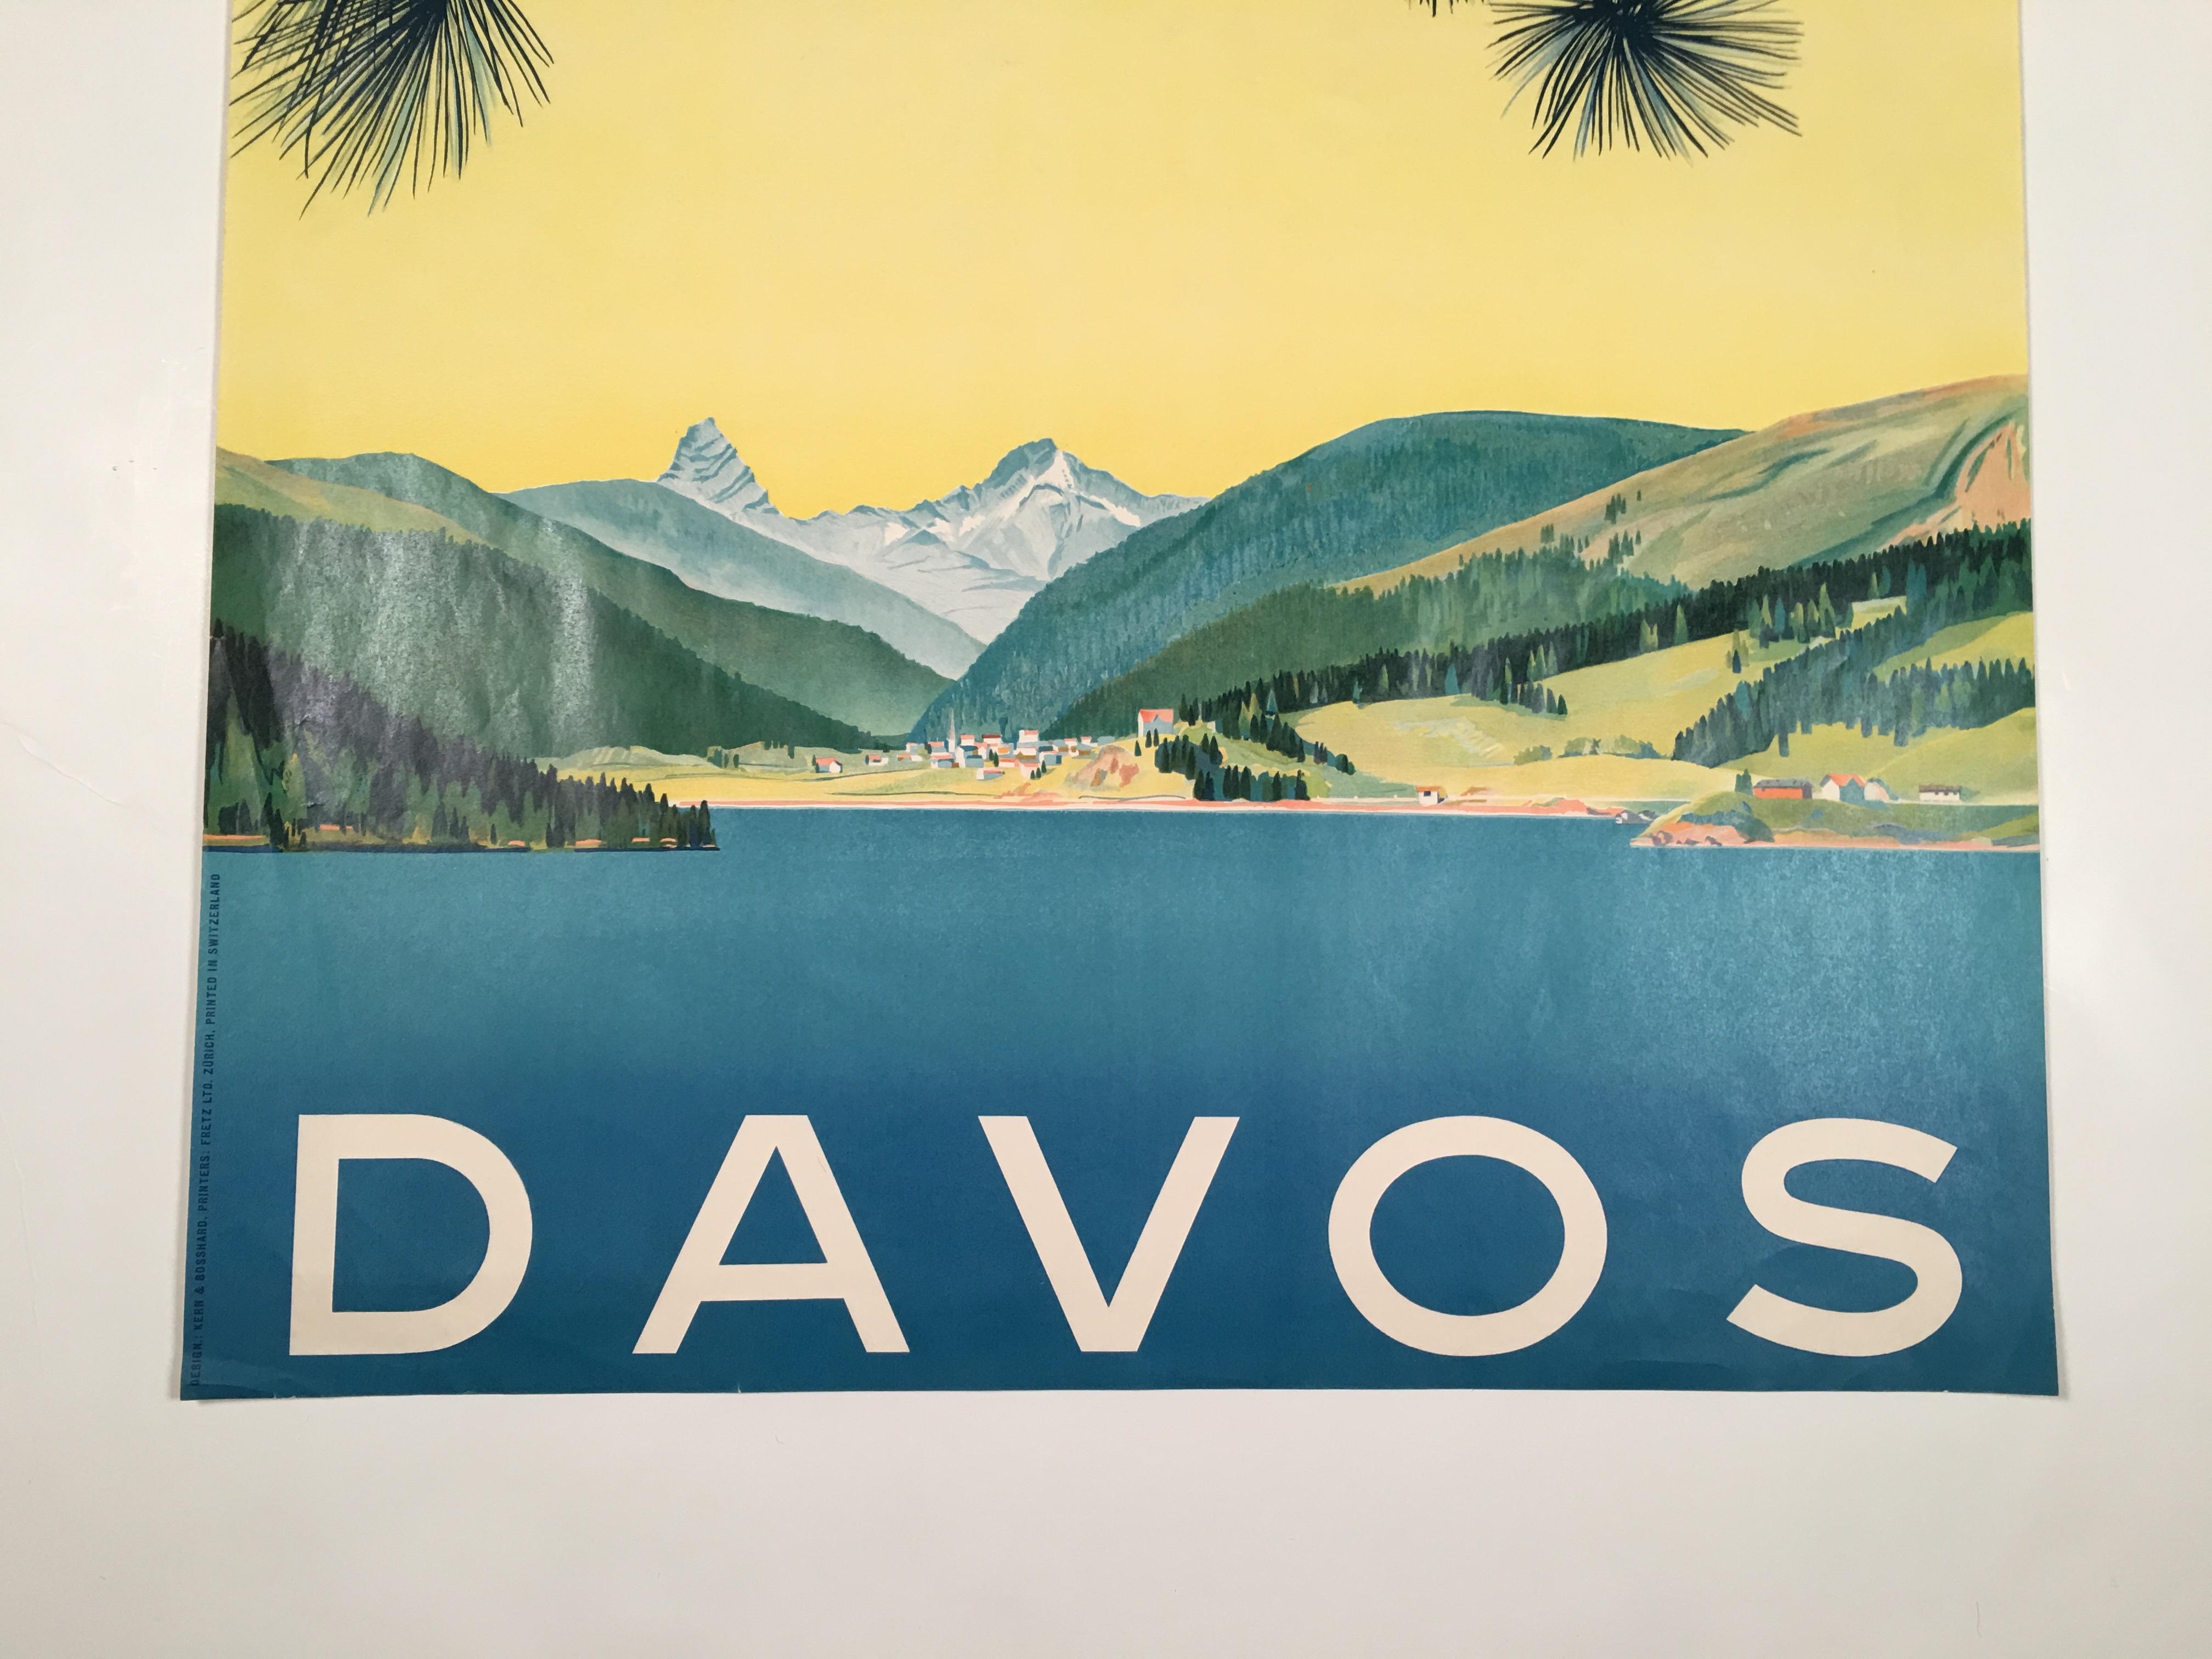 An original Swiss lithograph travel poster for Davos, designed by Kern and Bosshard, circa 1949, featuring a strikingly modern design, with the branches of a pine tree in the foreground against a beautifully colored sky, which goes from blue to